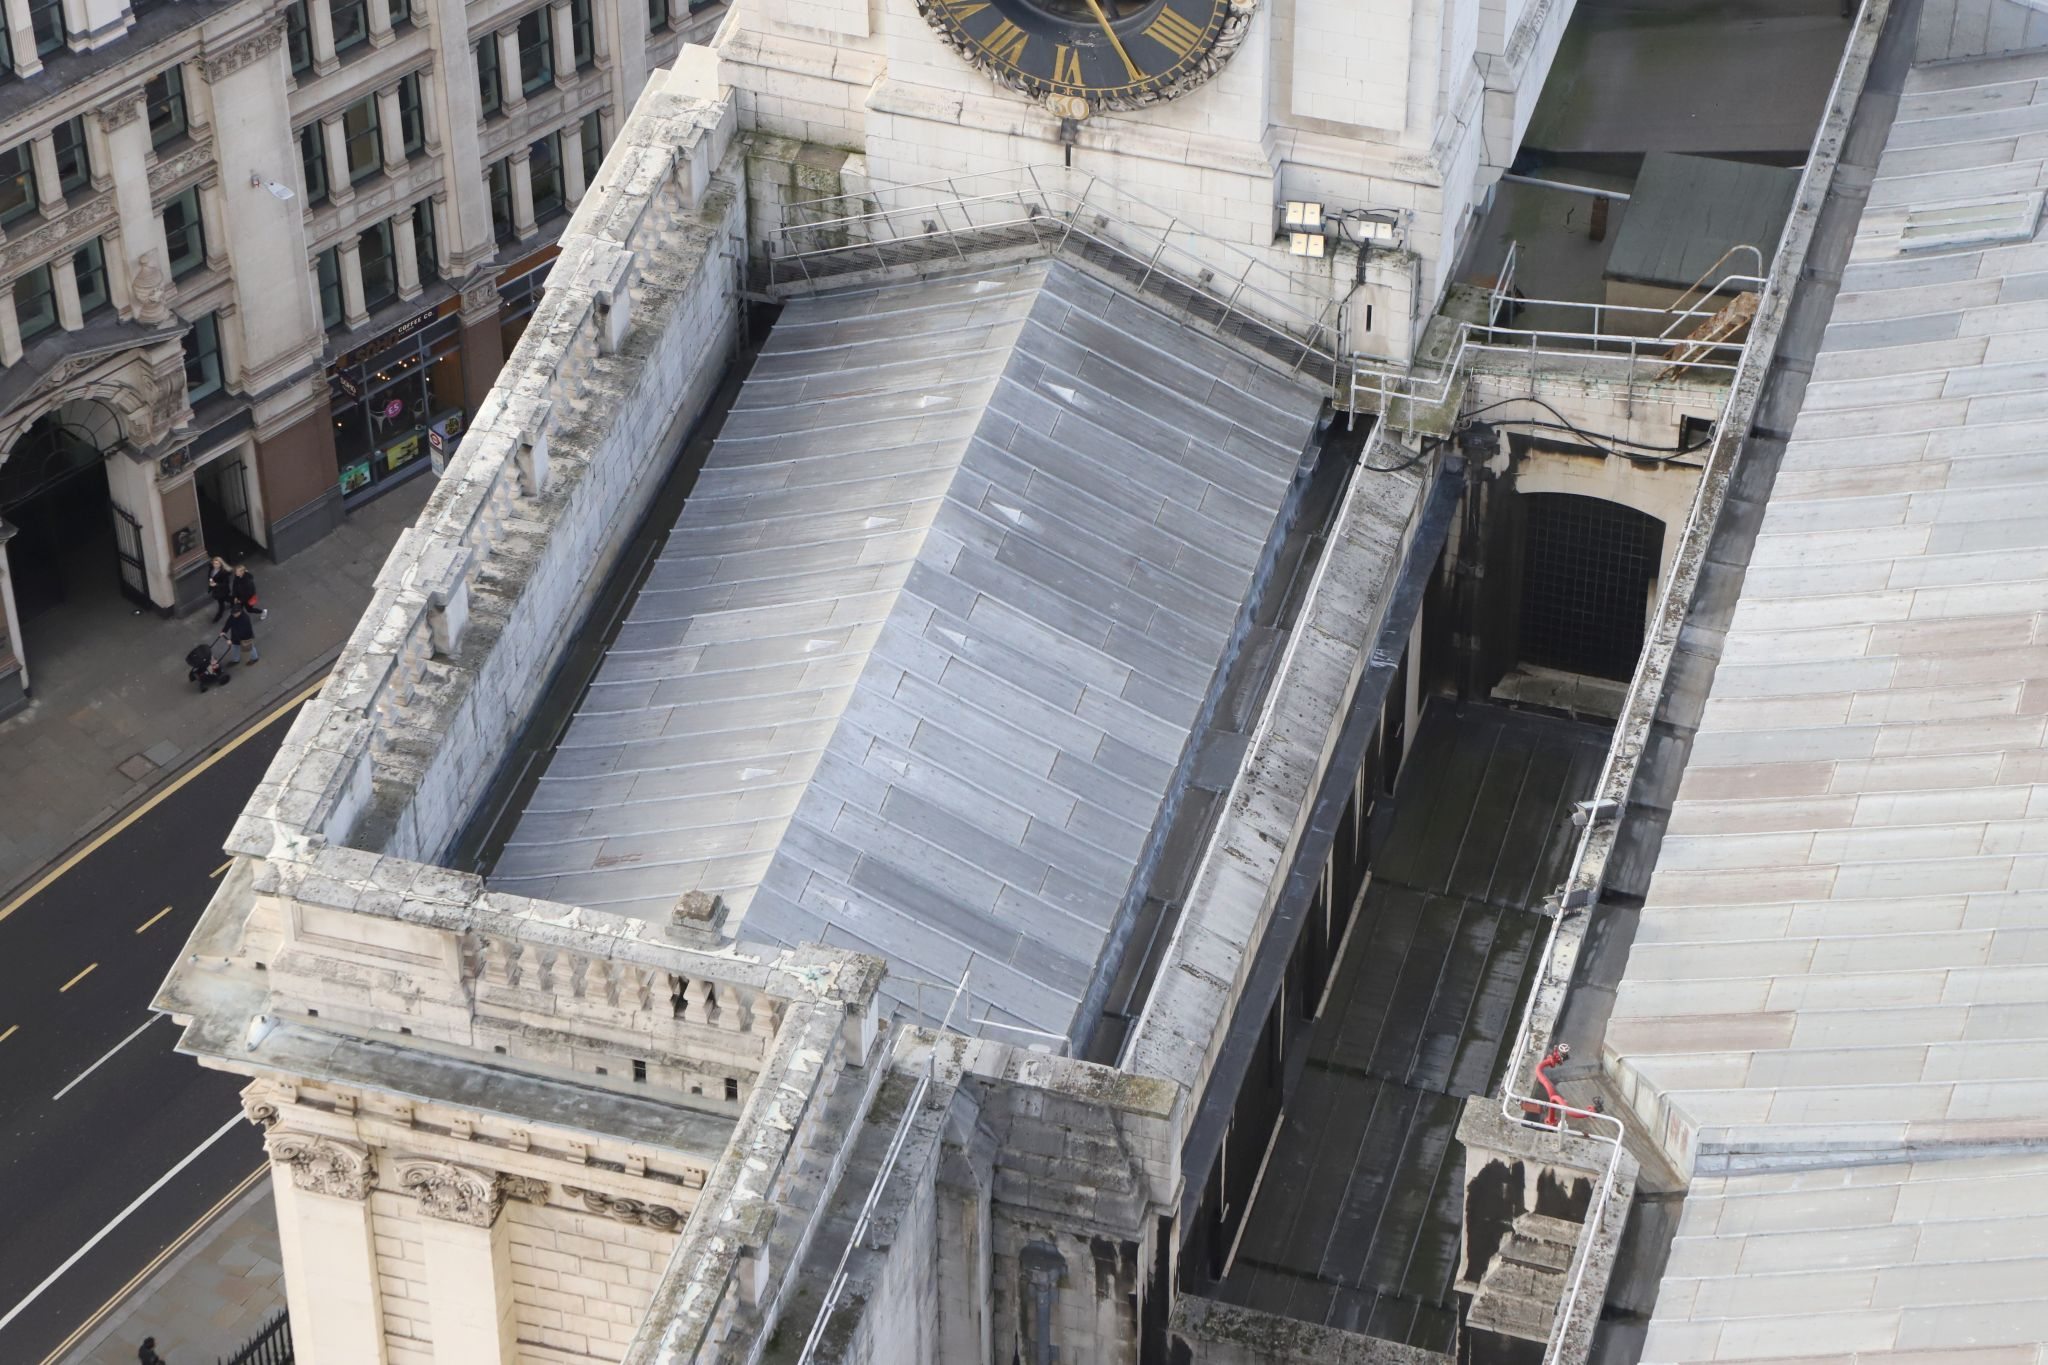 The roof of St. Paul's cathedral seen from the Golden Gallery on the top of the dome showing the roof of the room containing the Library.